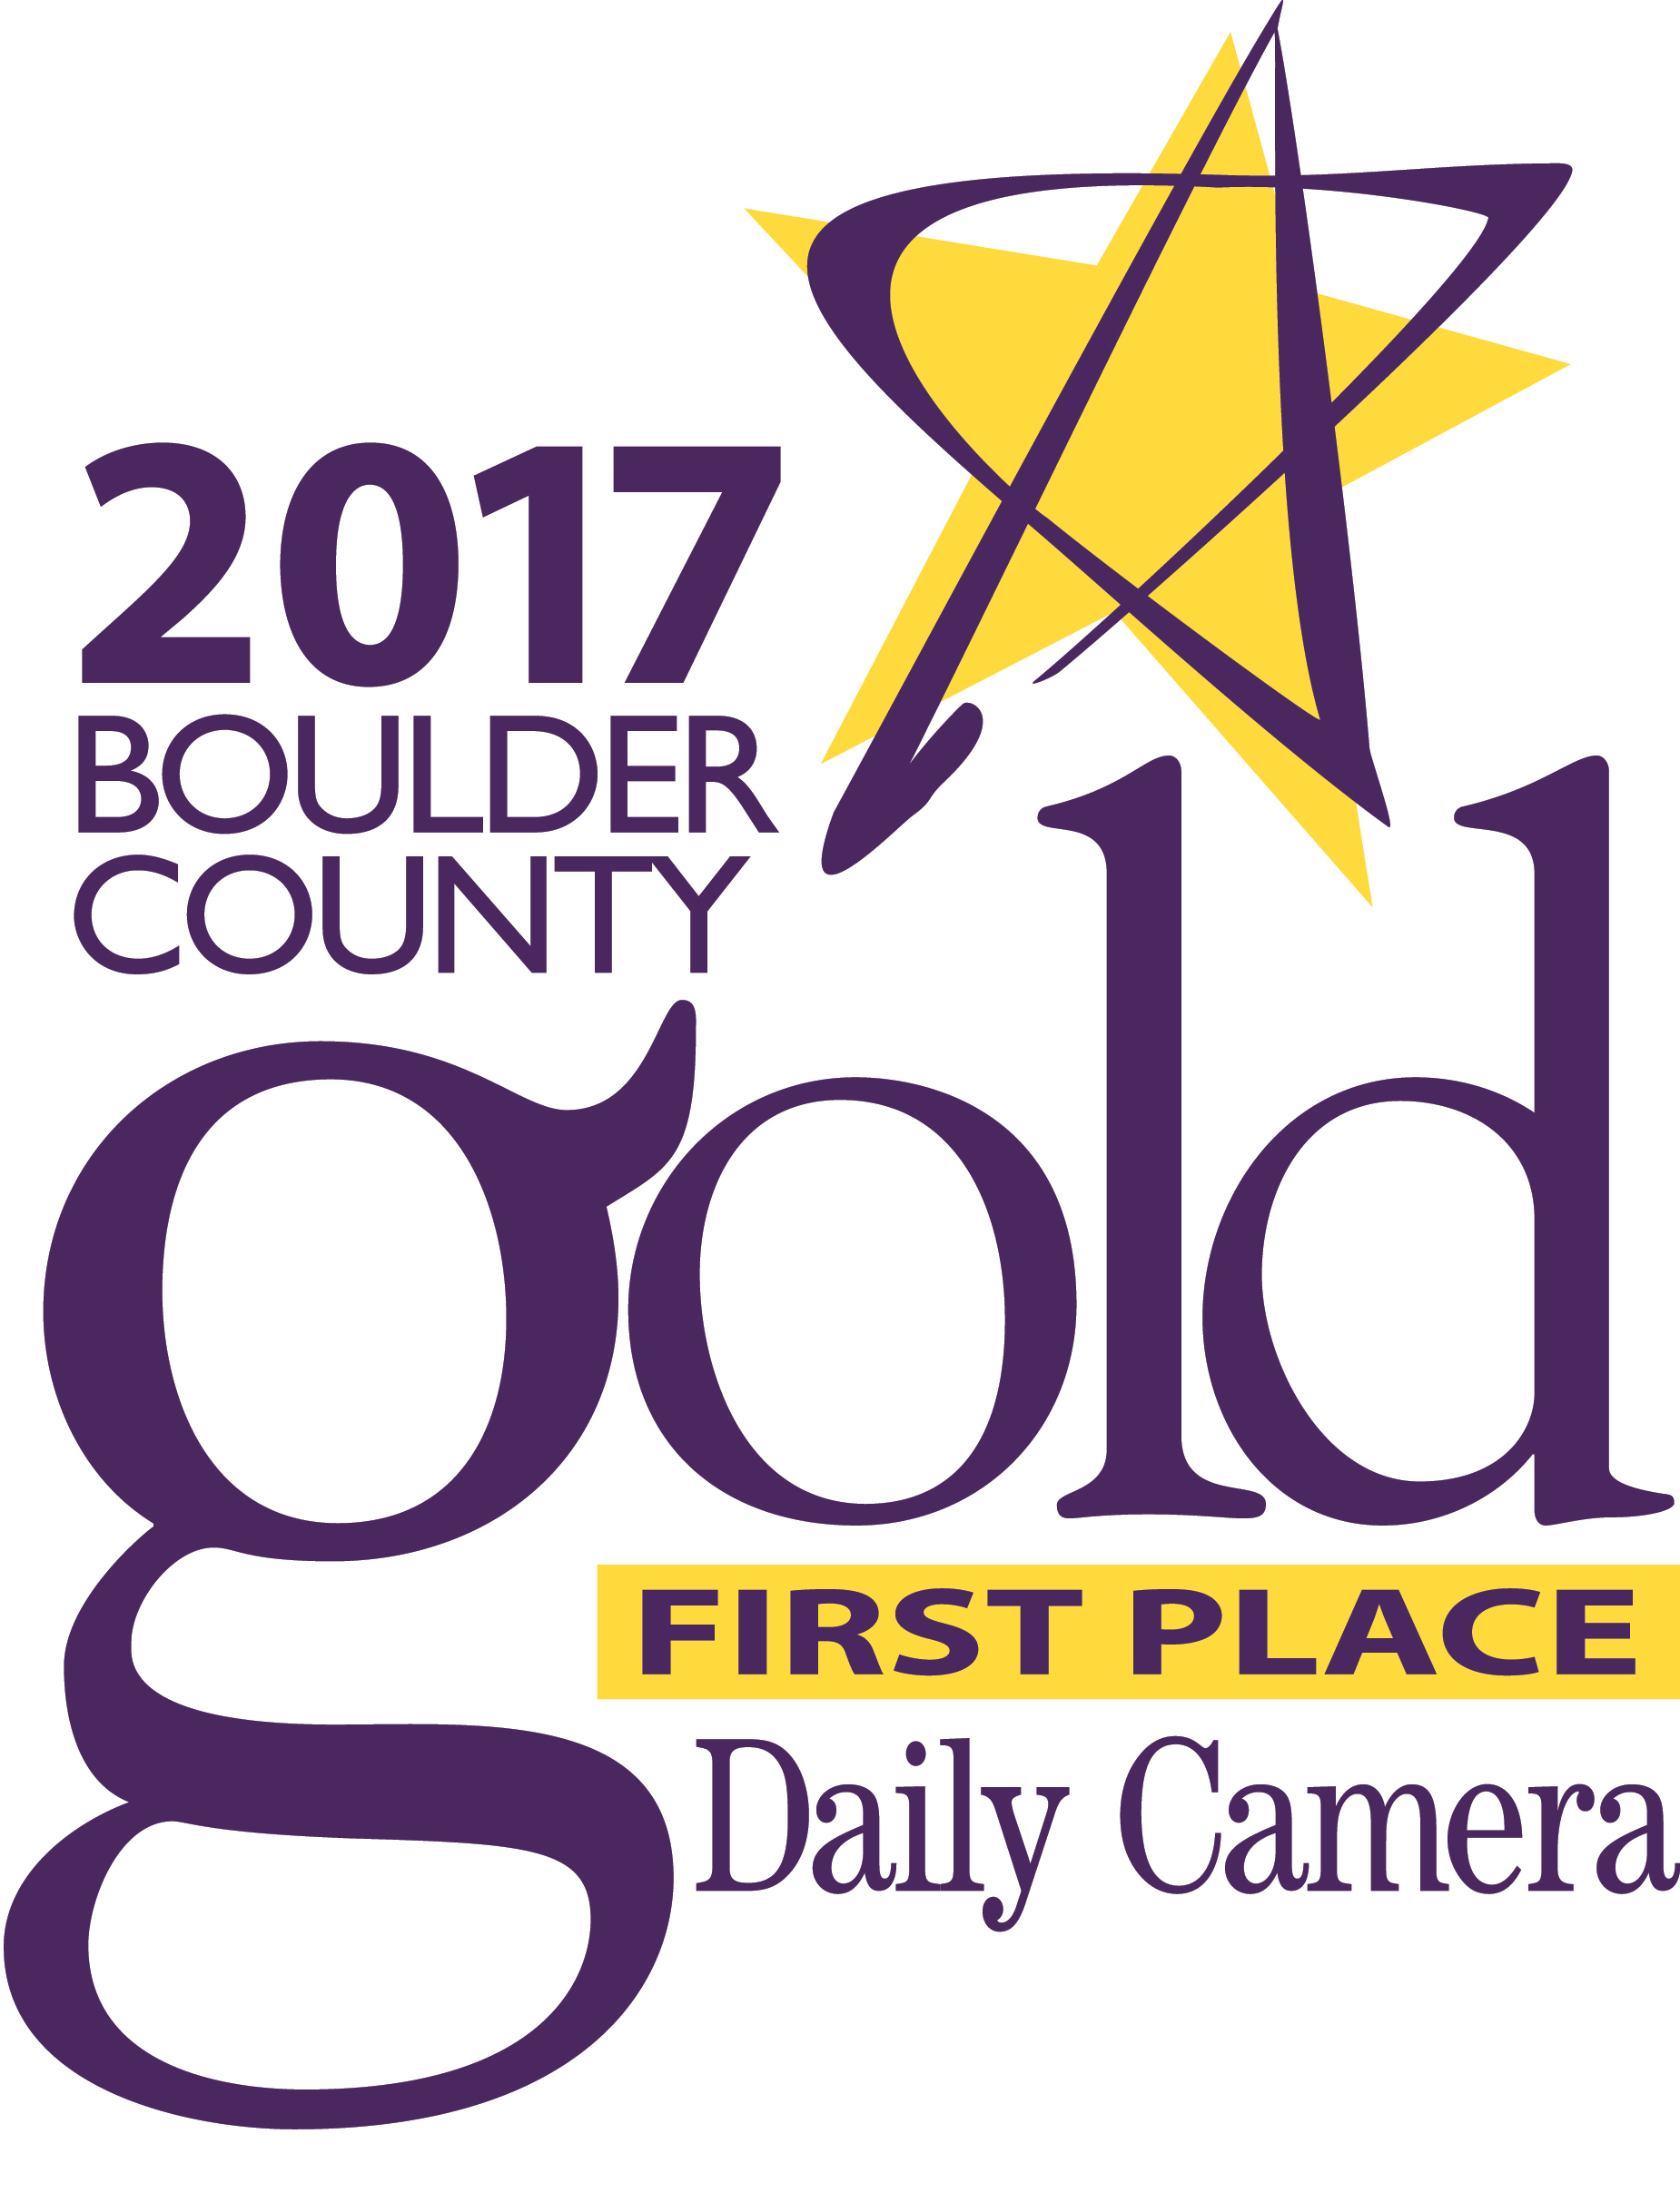 Voted on by thousands of Boulder County residents and shoppers, the Boulder County Gold awards present first place and runners-up awards to companies and places that represent the best the county has